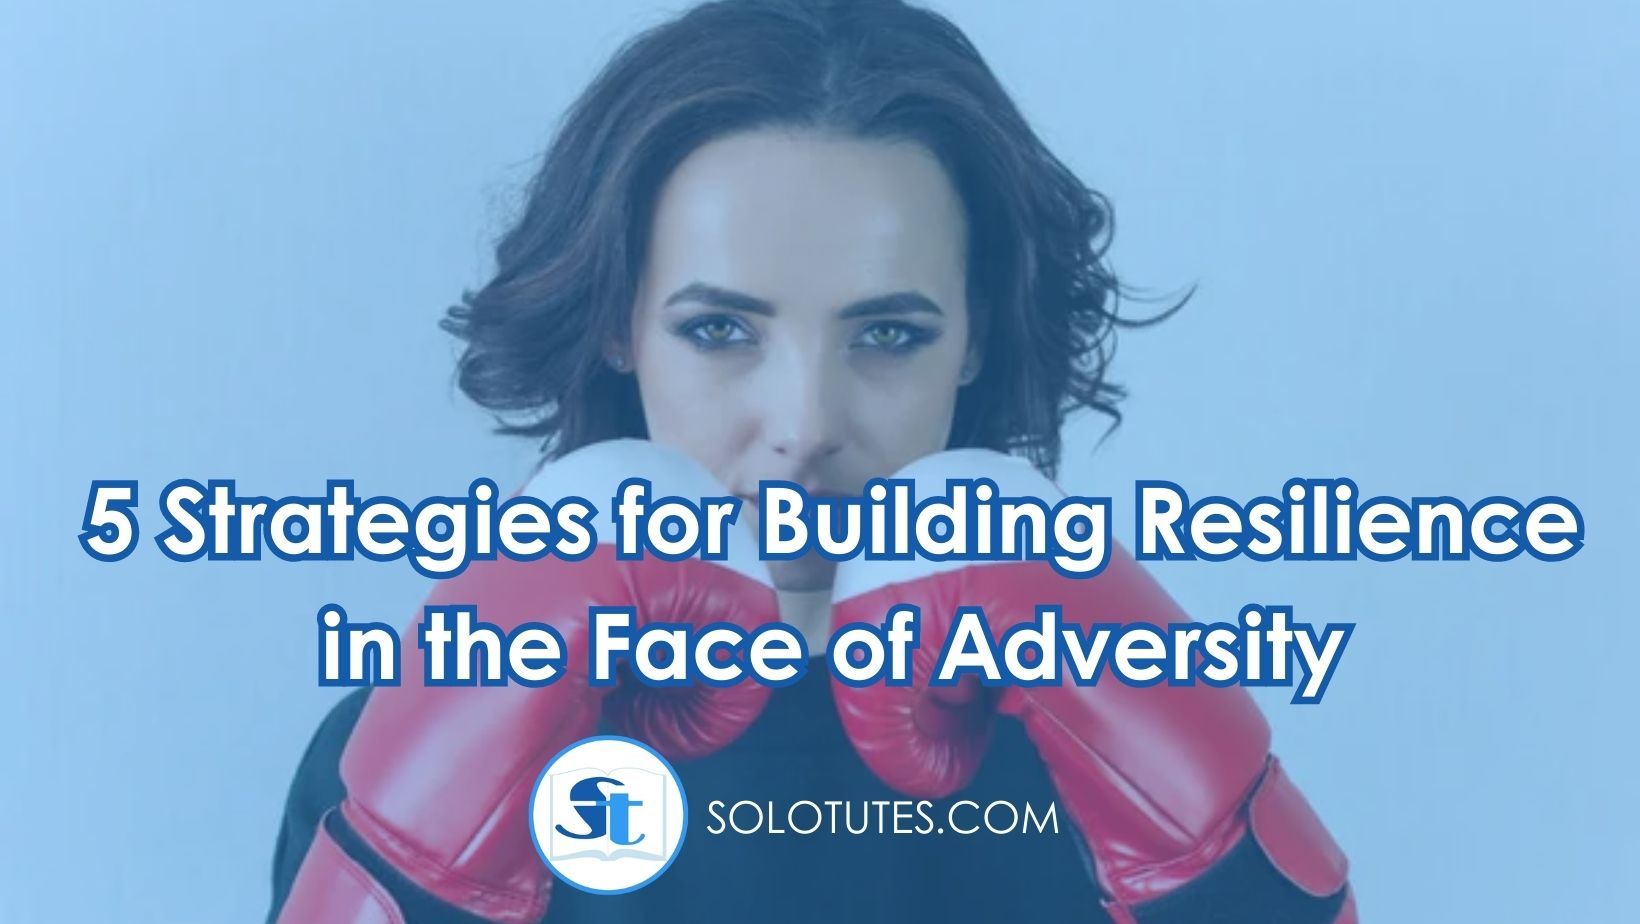 5-strategies-for-building-resilience-in-the-face-of-adversity-1888